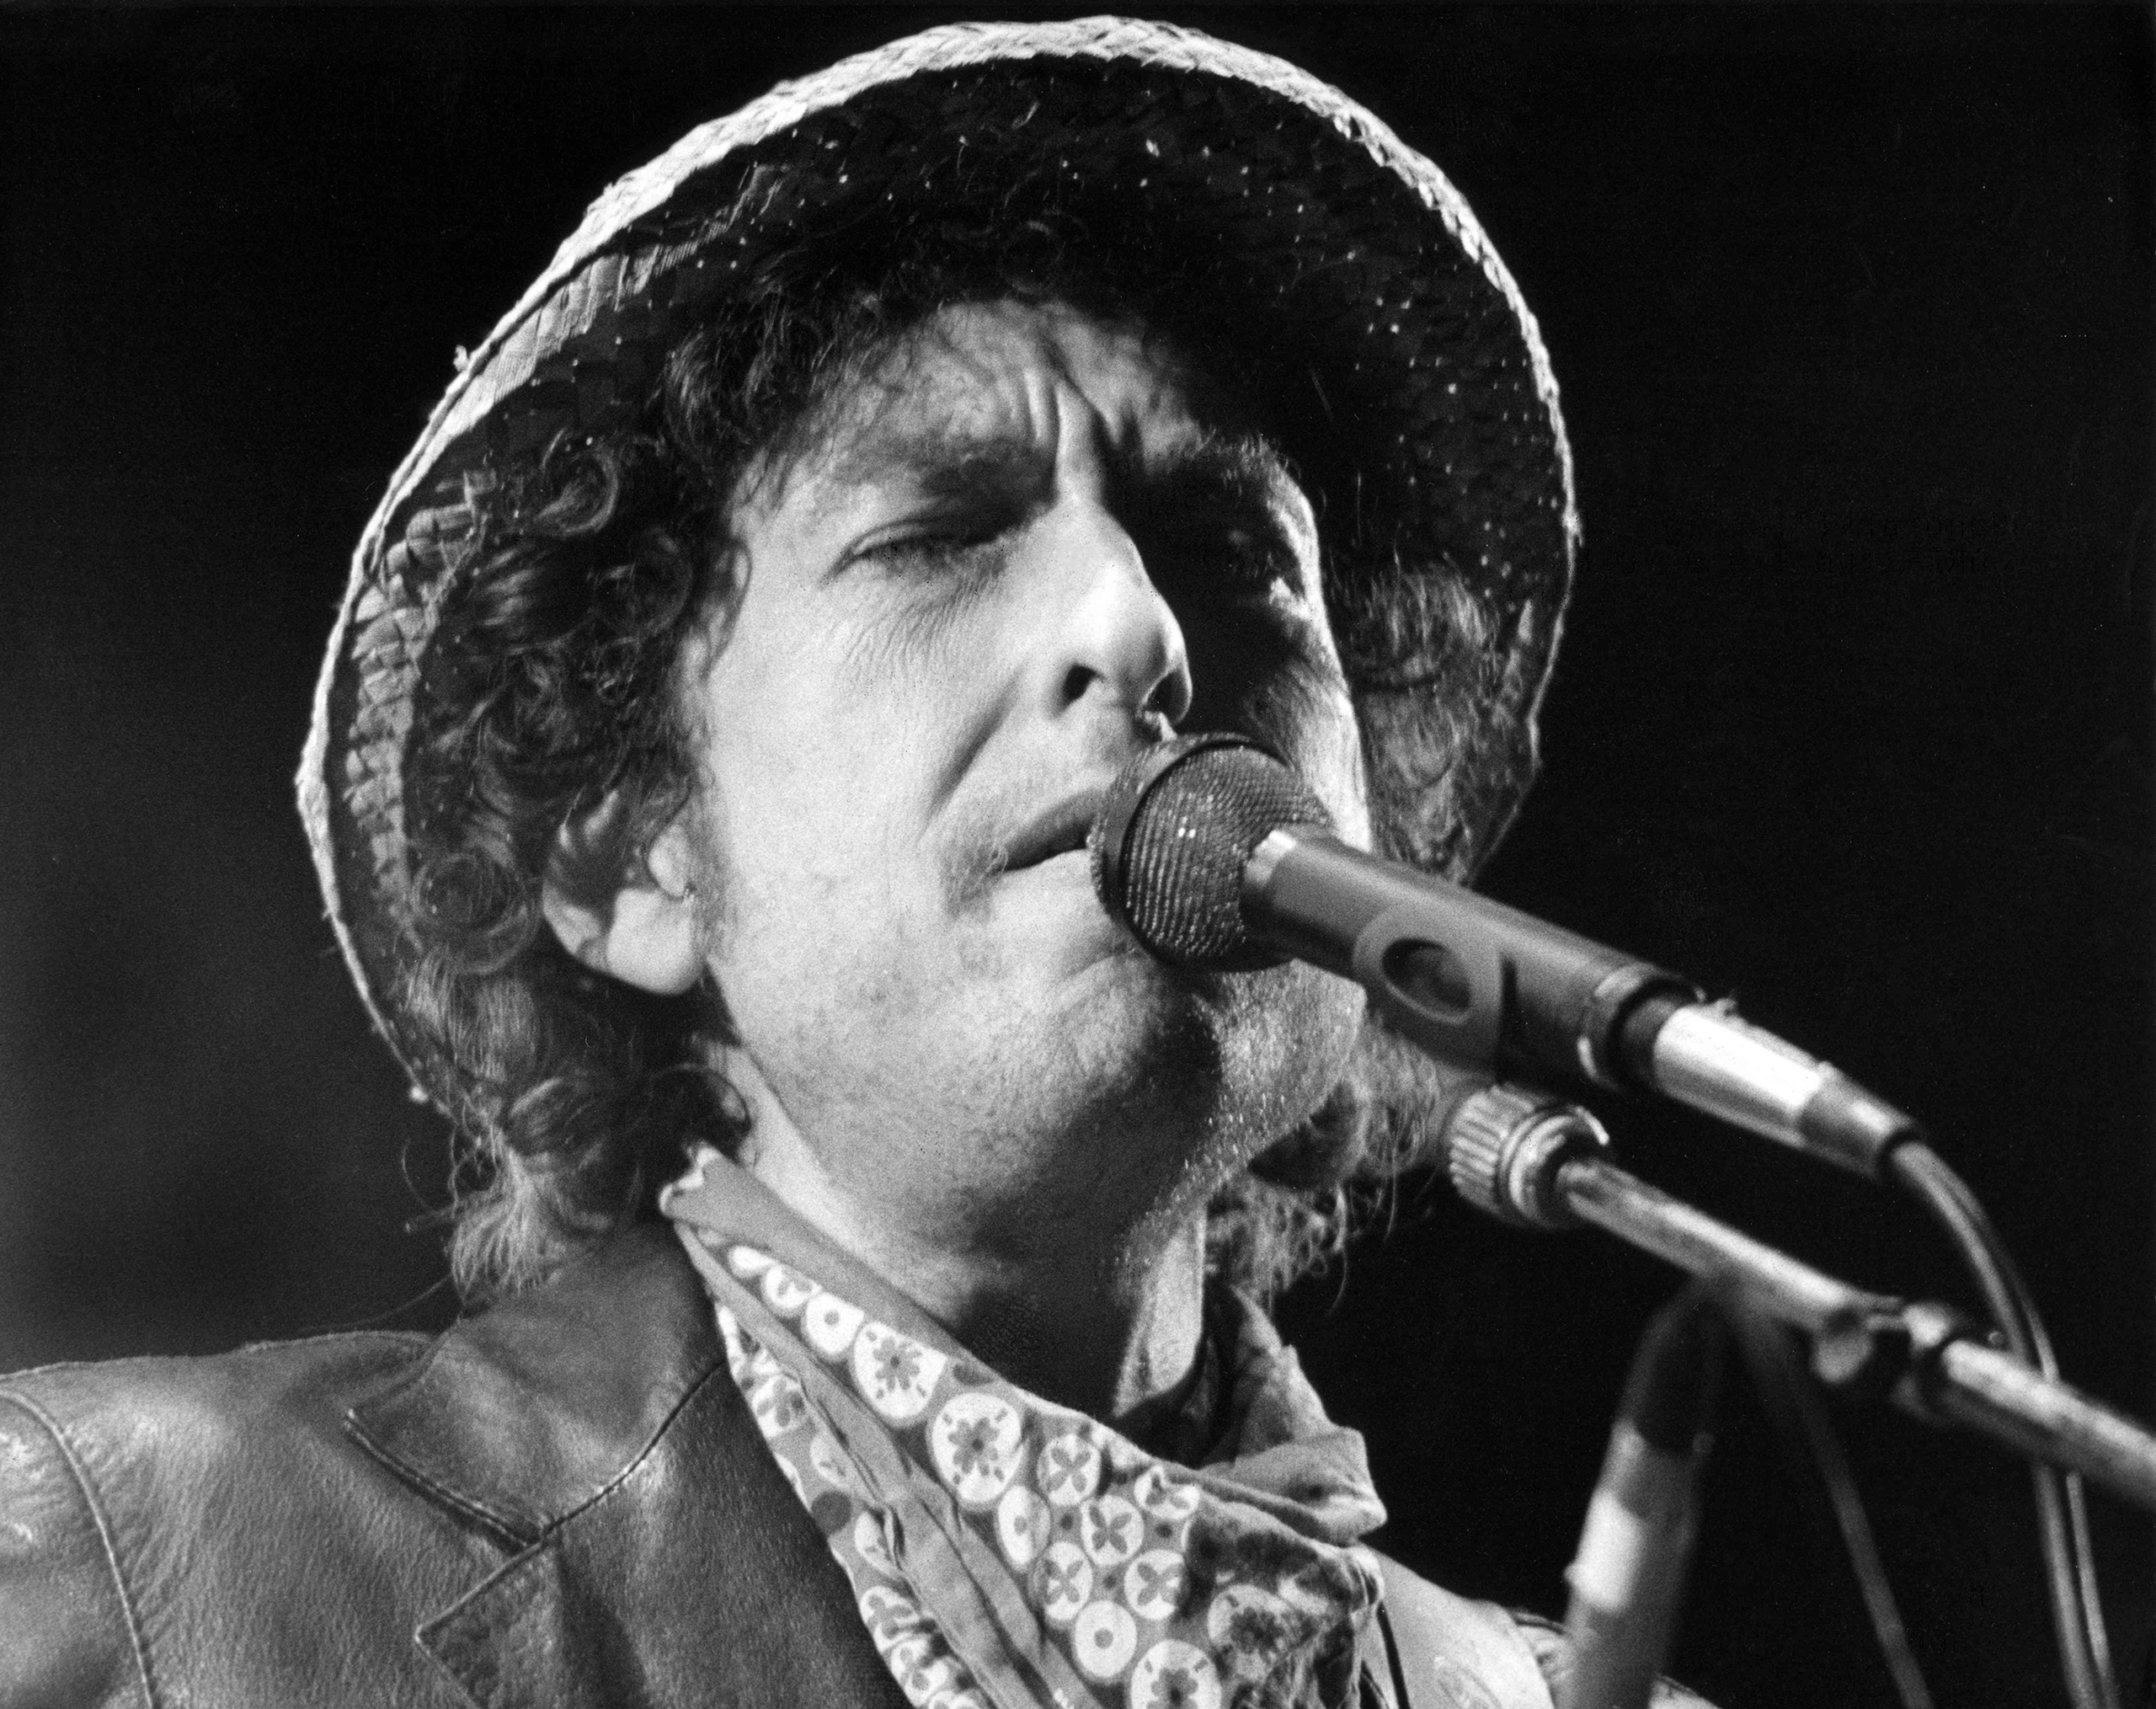 Bob Dylan performs during a concert at the Olympic stadium in Munich, southern Germany, on June 3, 1984. Dylan won the Nobel Prize in Literature on Oct. 13, 2016. (Istvan Bajzat—DPA/AFP/Getty Images)